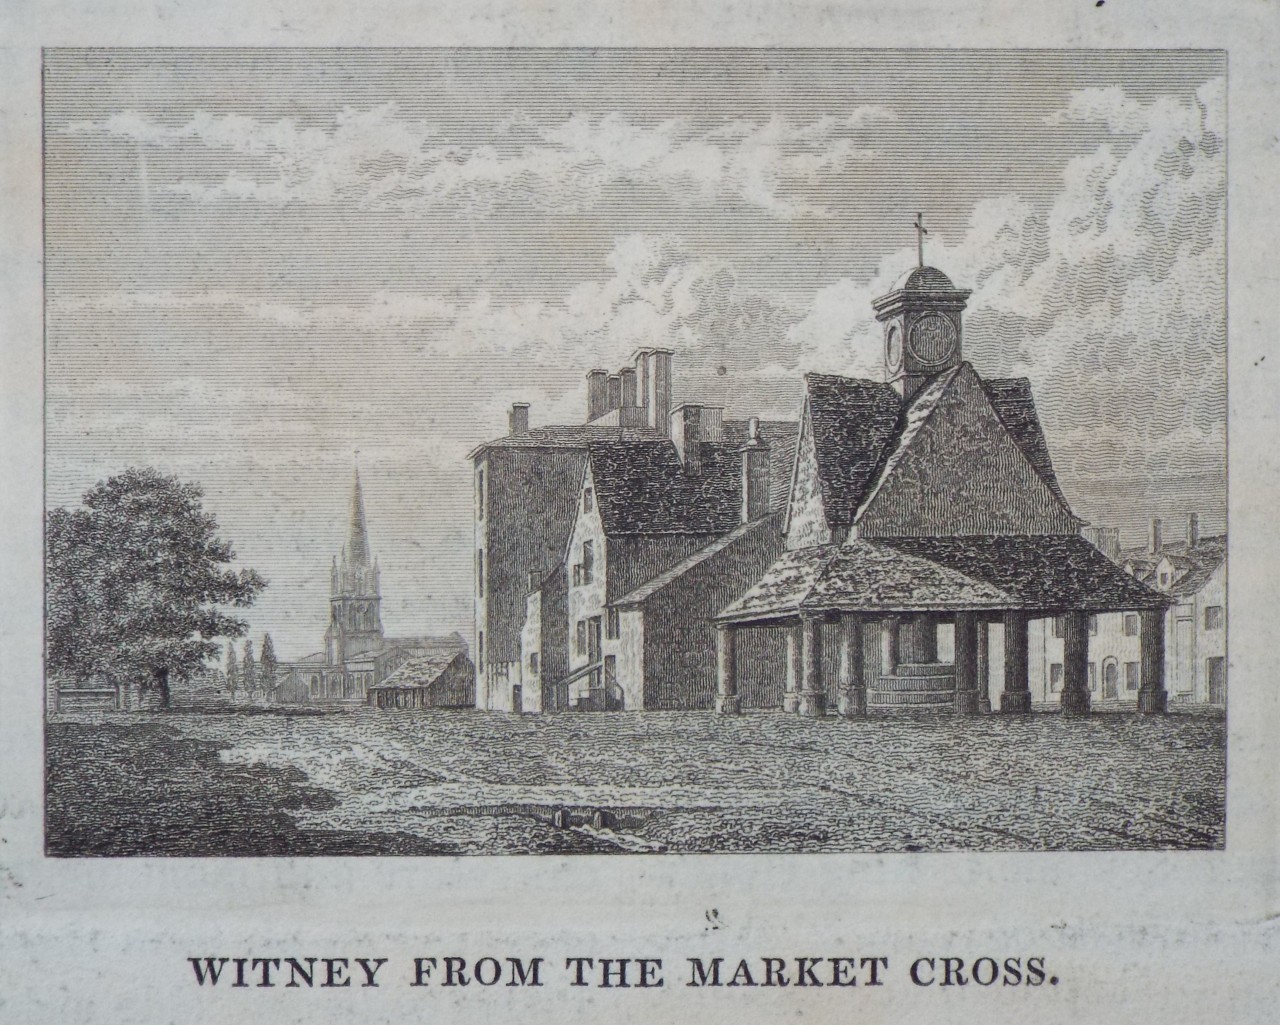 Print - Witney from the Market Cross.